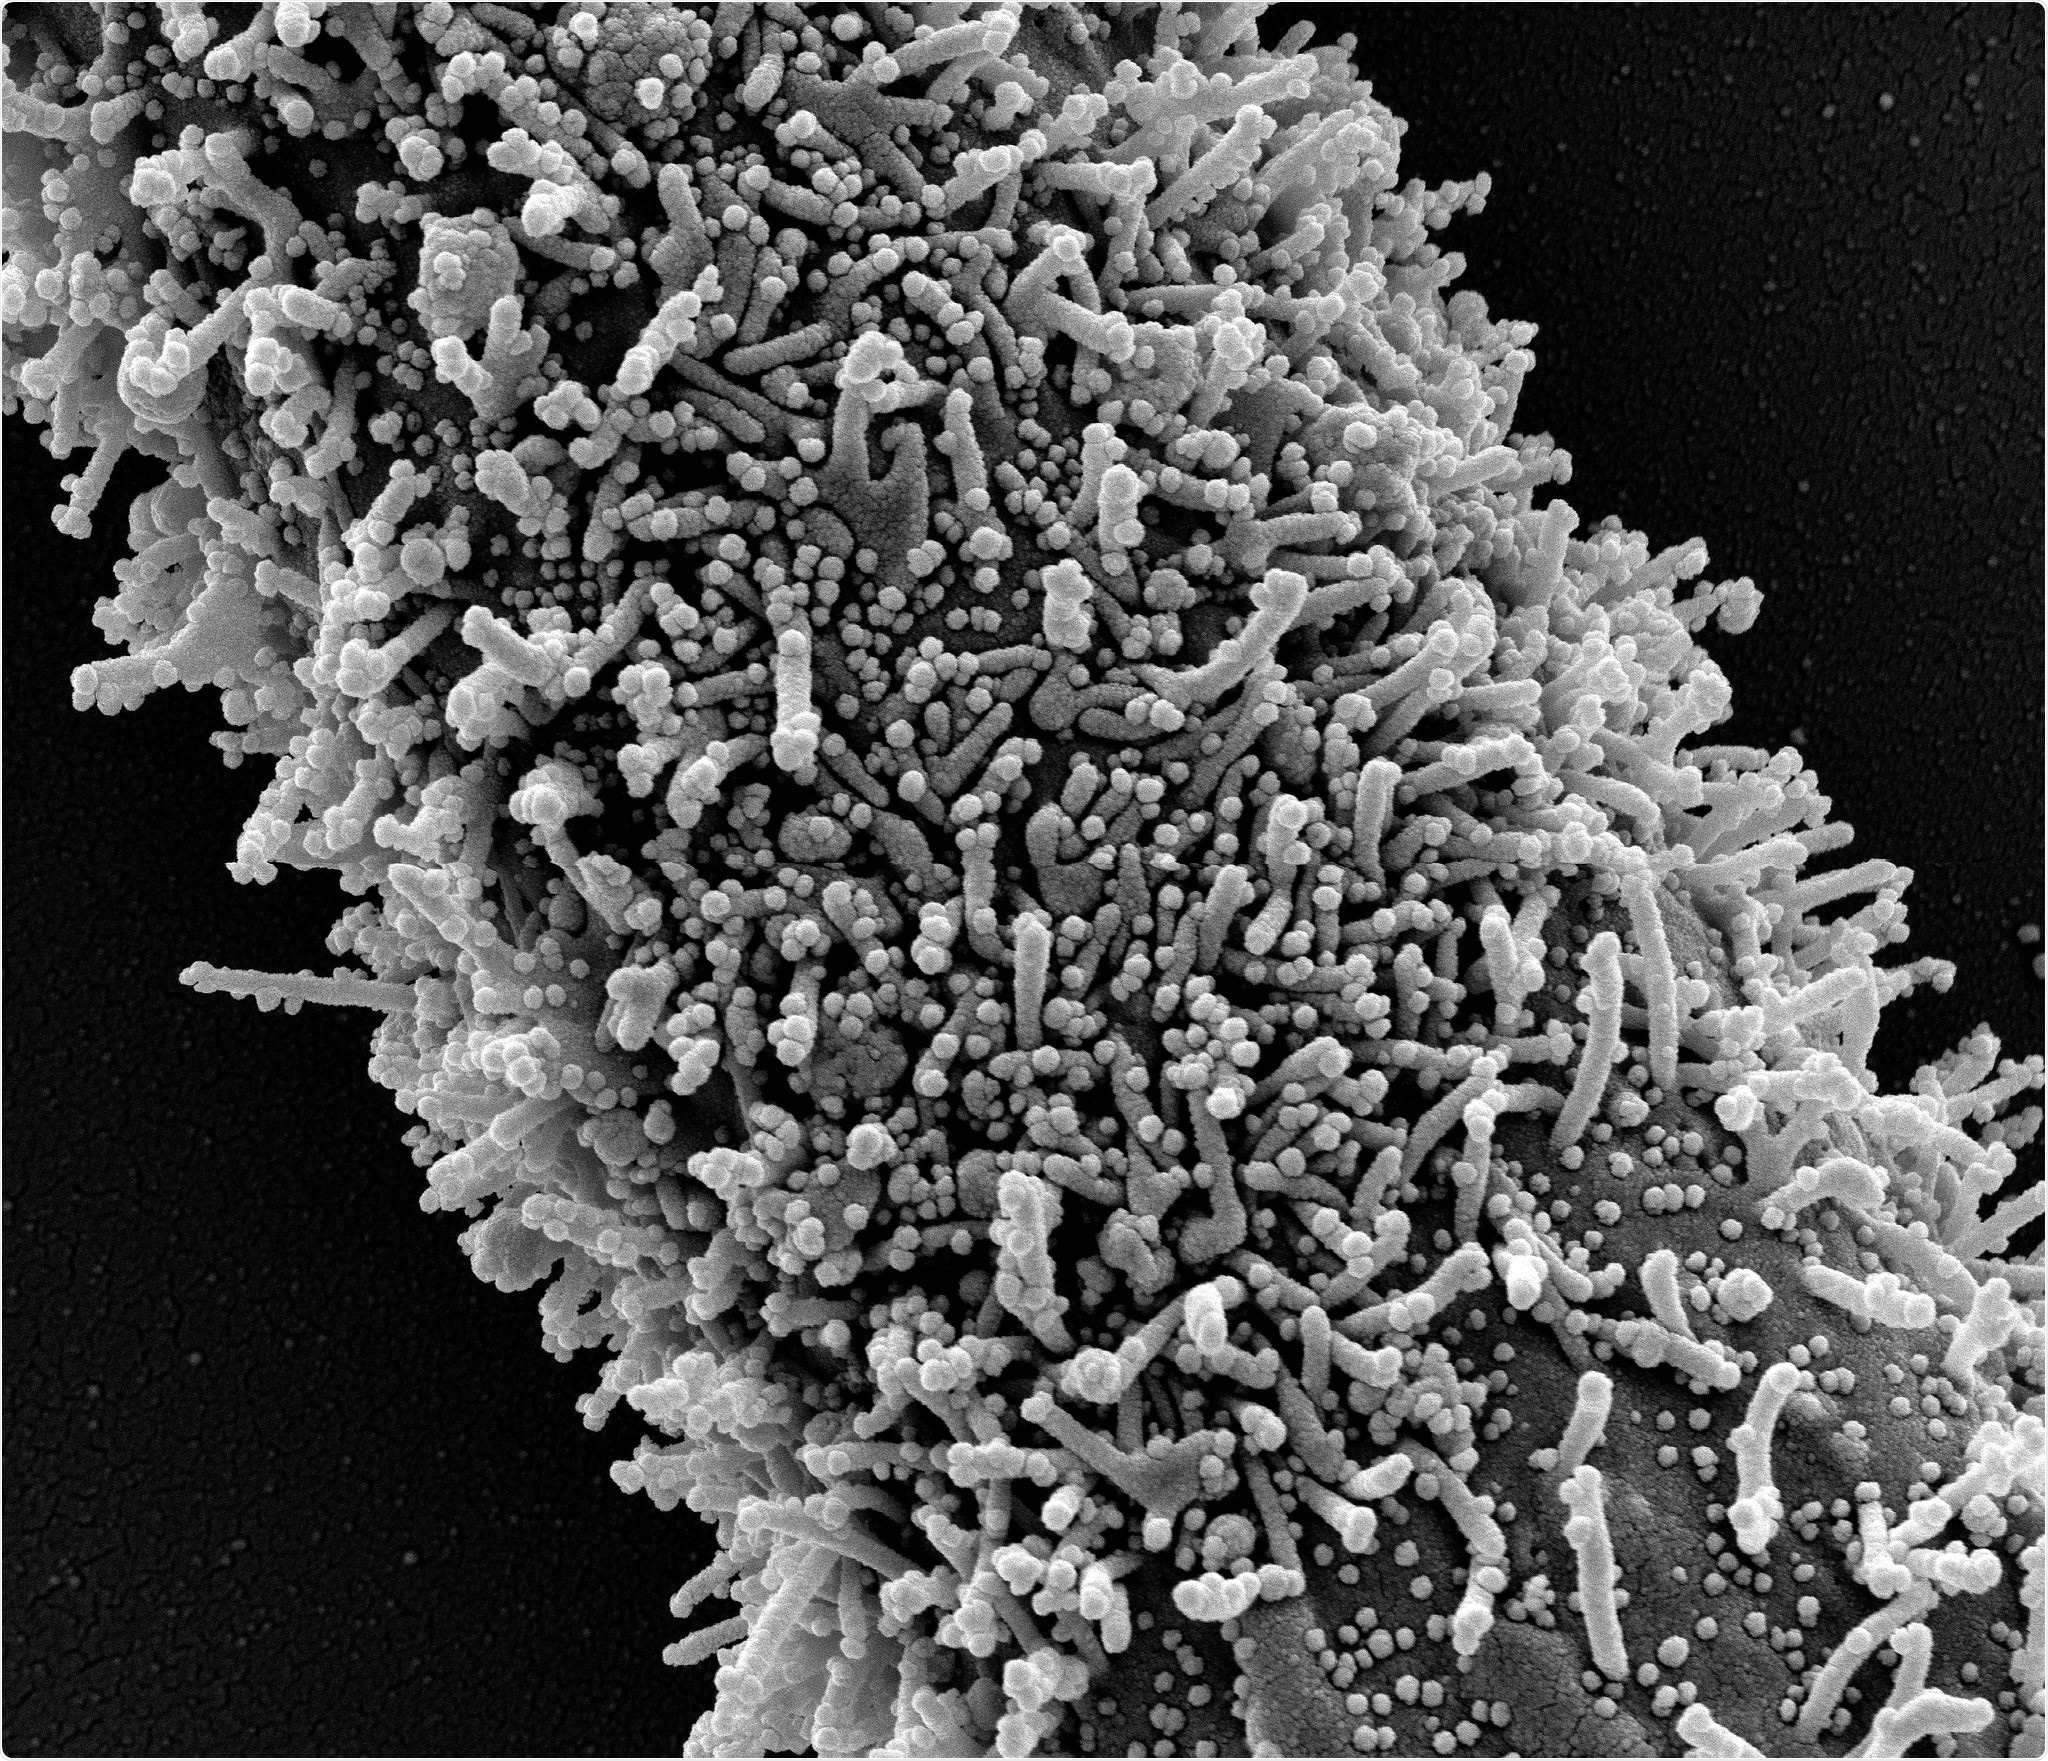 A single elongated CCL-81 cell heavily infected with SARS-CoV-2 virus particles. The small spherical structures in the image are SARS-CoV-2 virus particles. The rod-shaped protrusions from the cells are cell projections or pseudopodium. Image captured at the NIAID Integrated Research Facility (IRF) in Fort Detrick, Maryland. Credit: NIAID